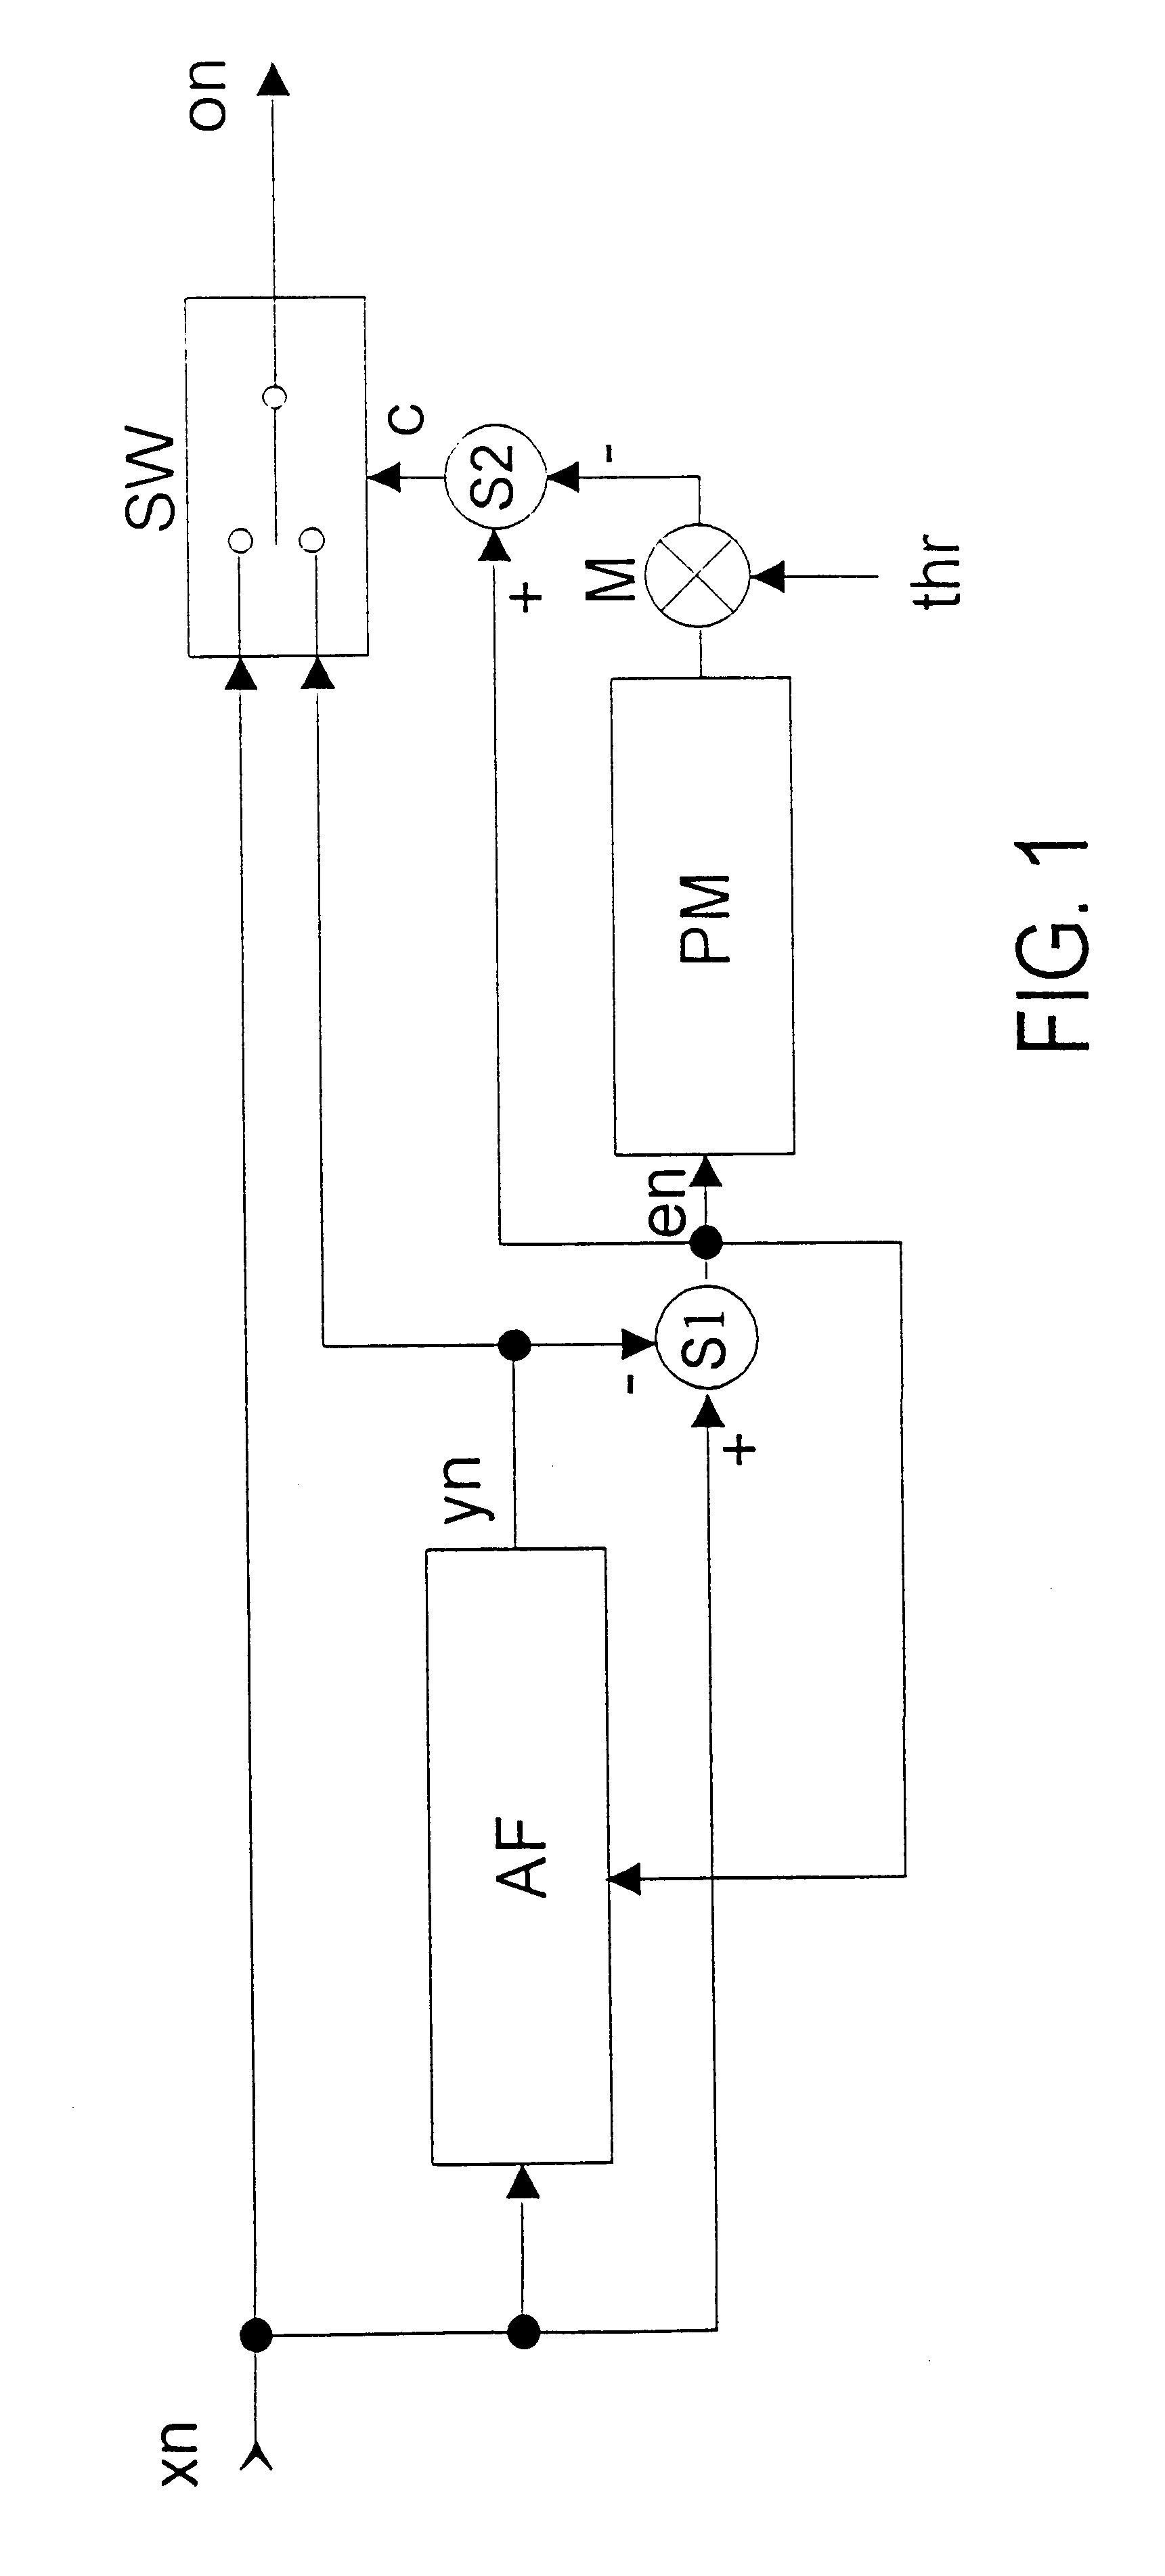 Method, equipment and recording device for suppressing pulsed interference in analogue audio and/or video signals